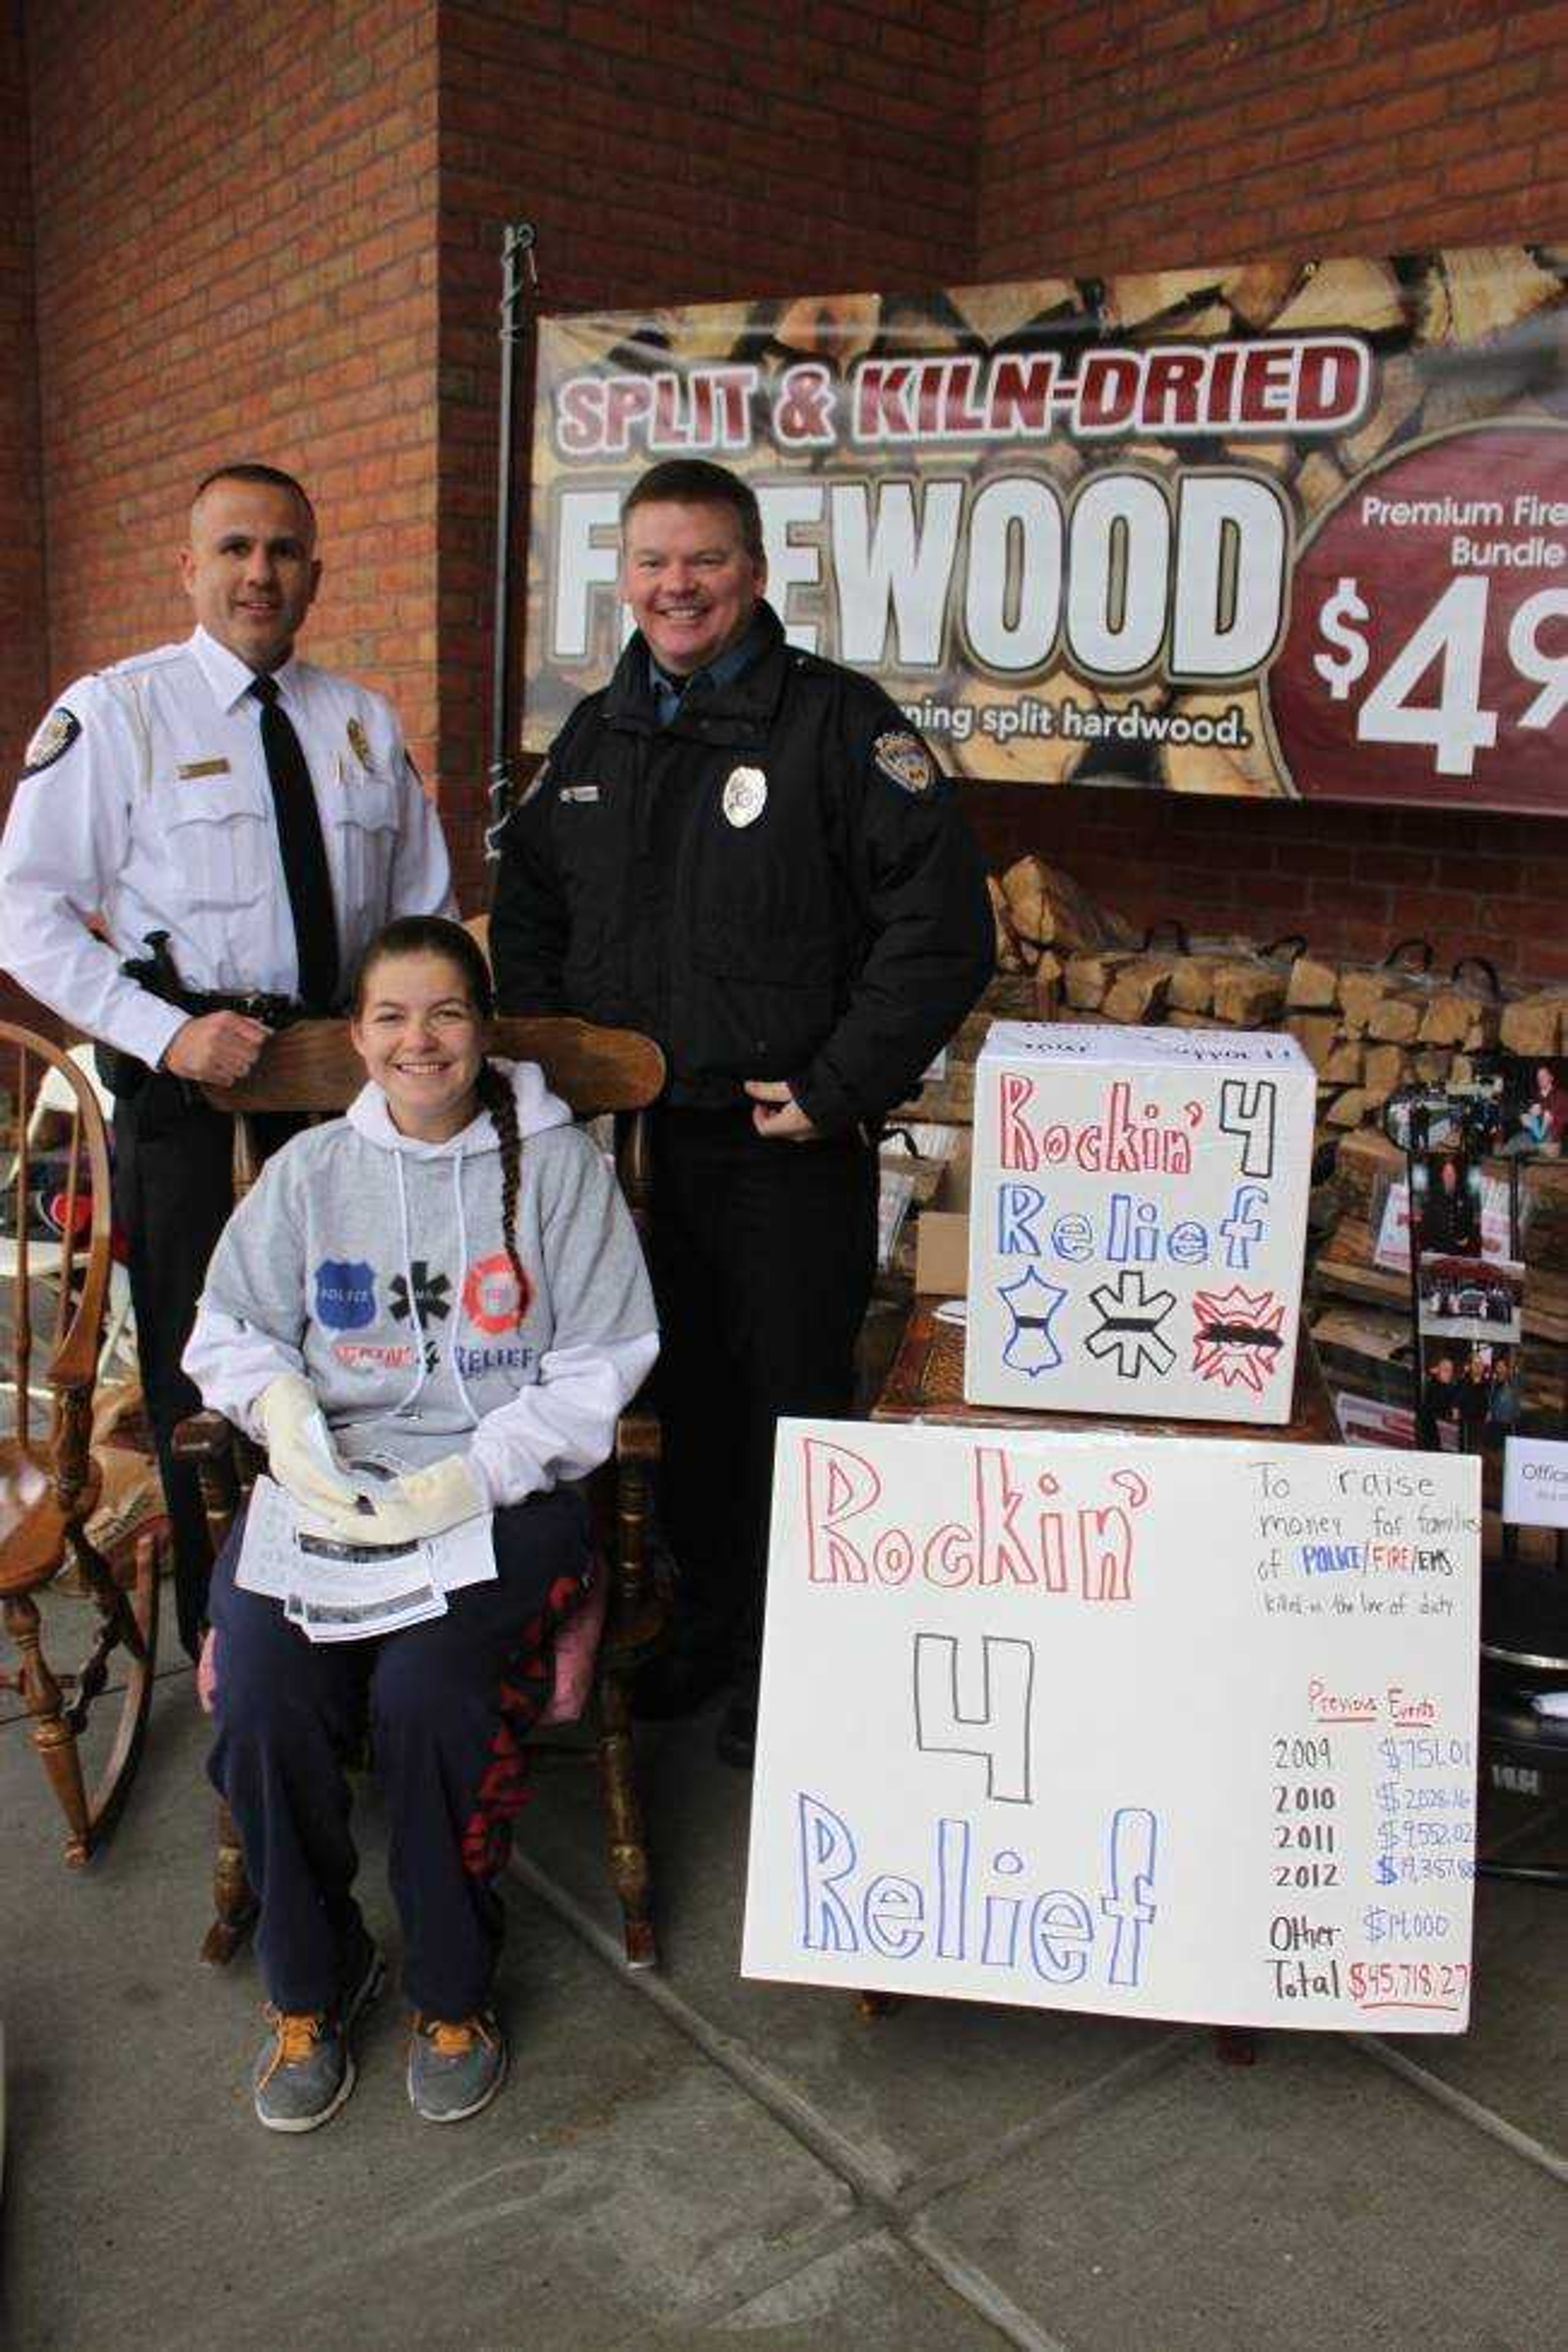 Jennifer Rubin, founder of Rockin 4 Relief, poses for a photo with two cops.